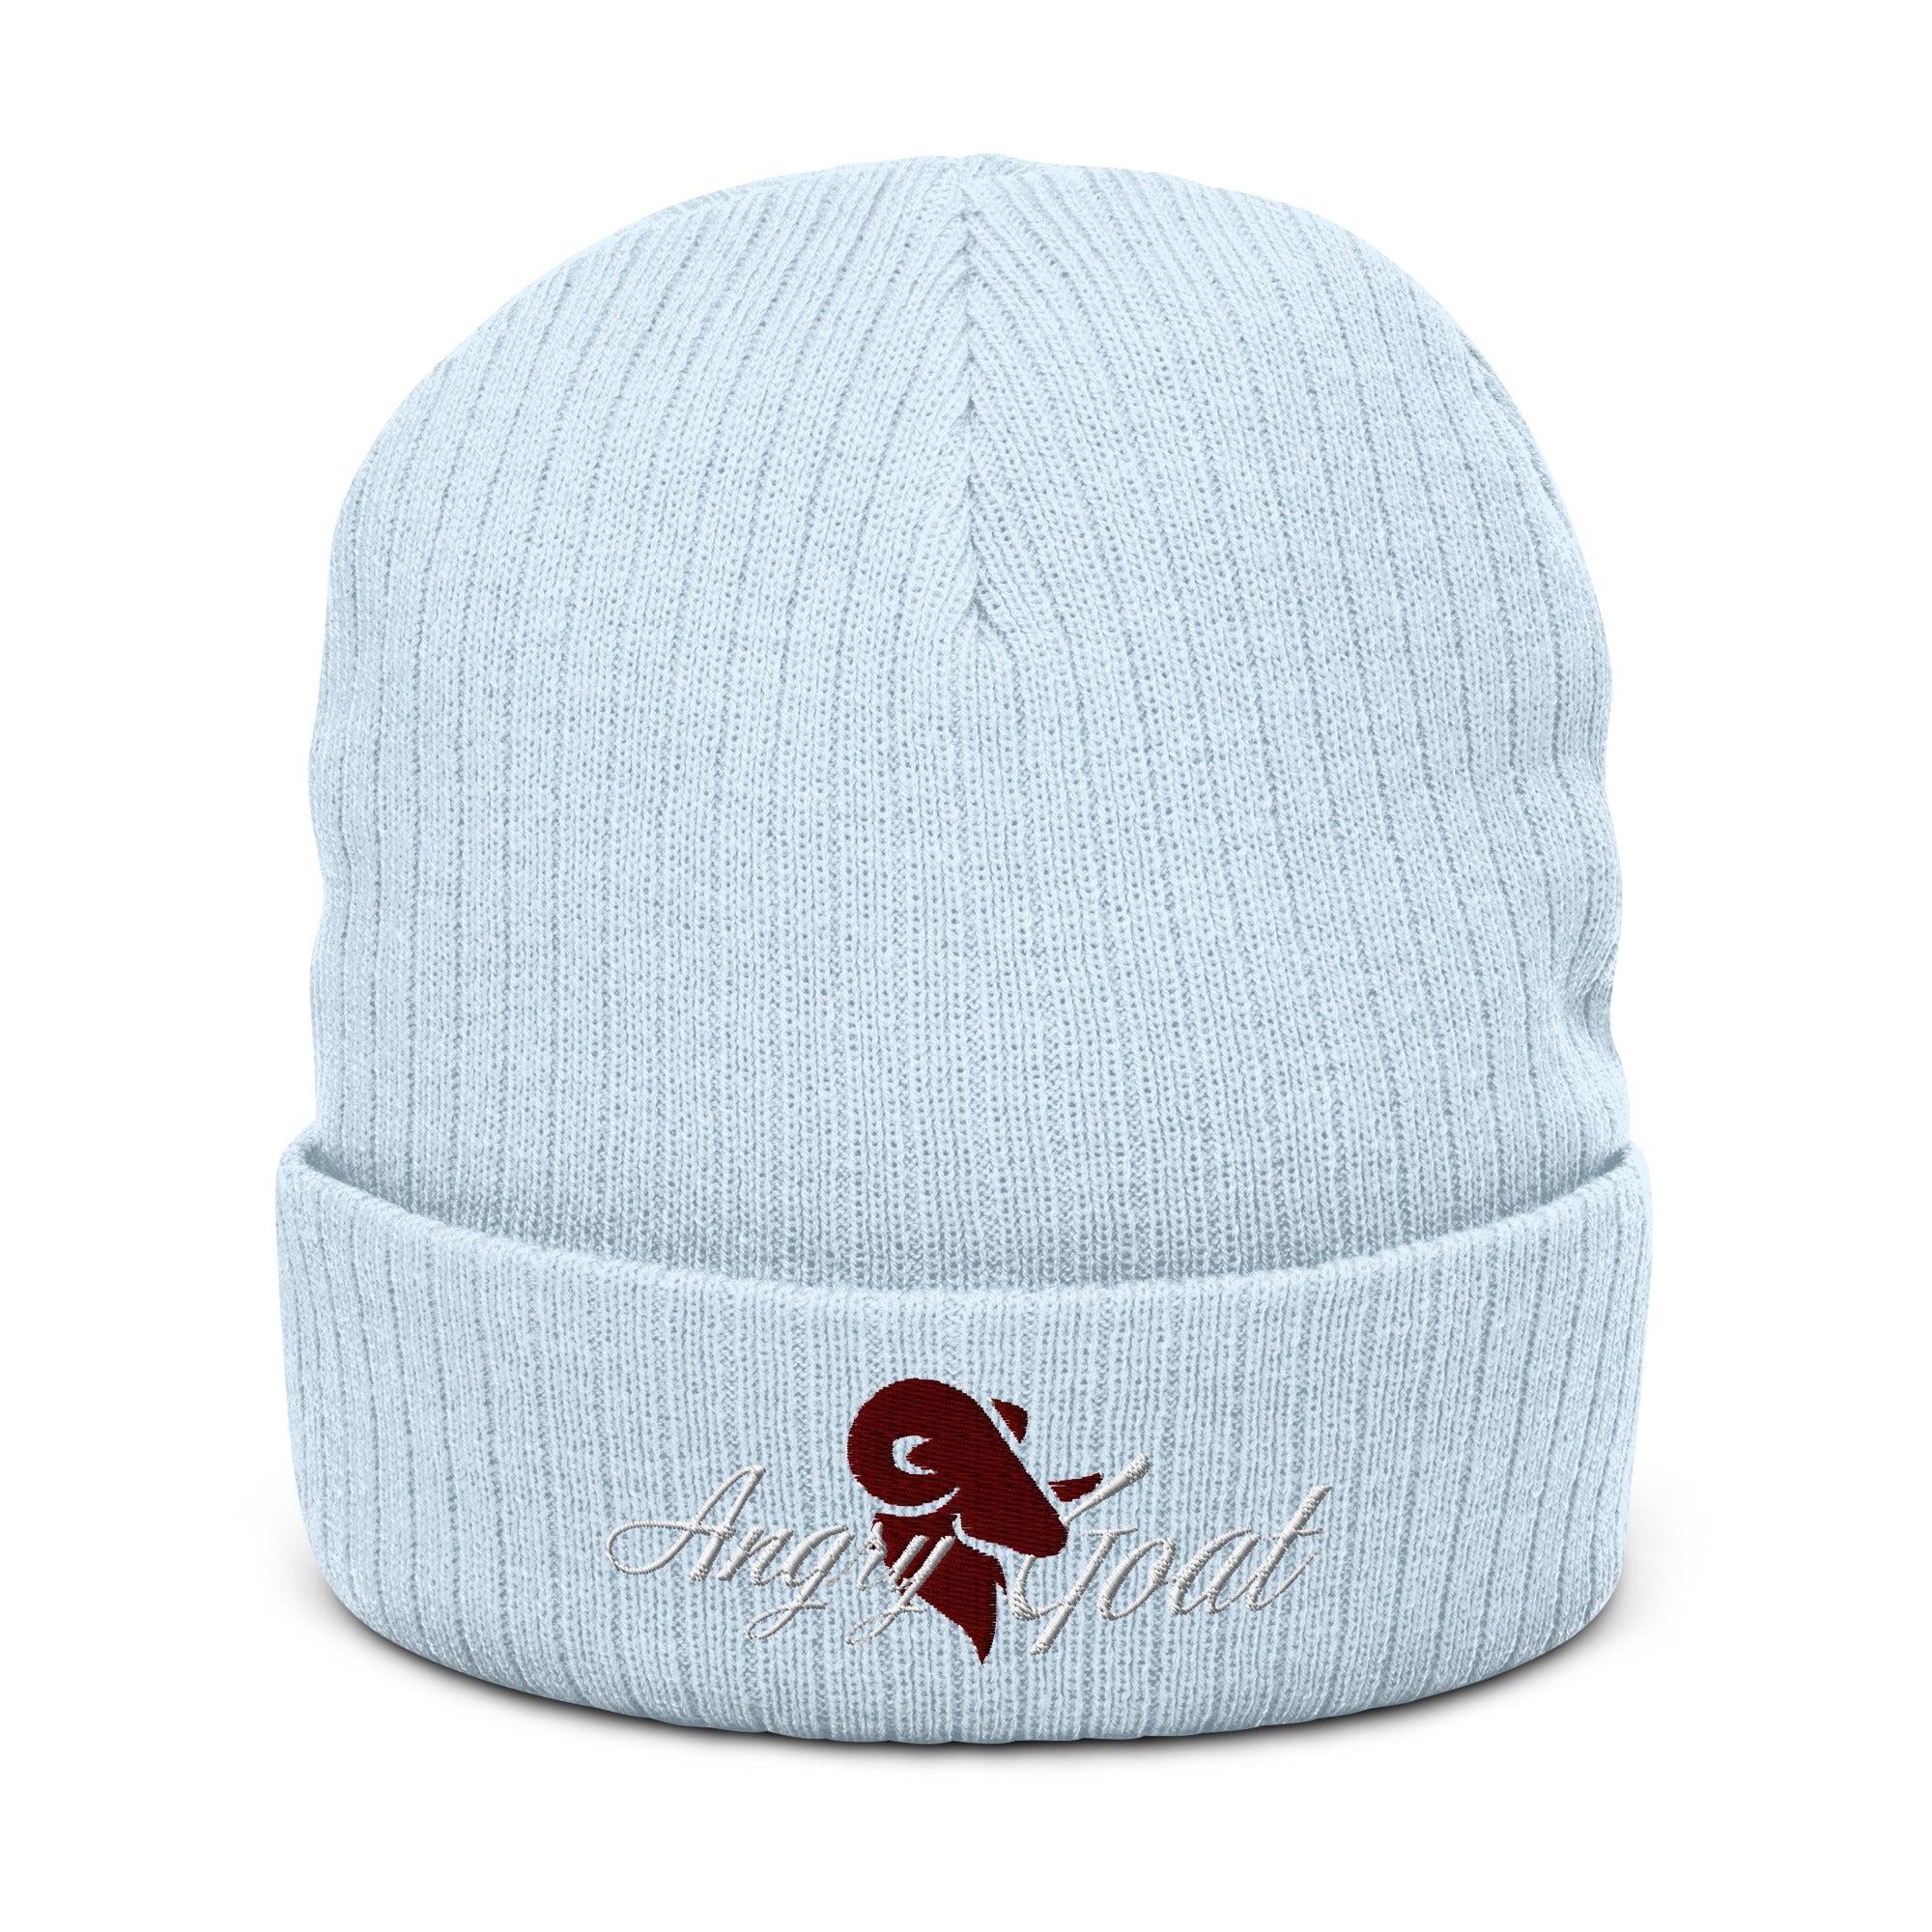 Angry Goat Ribbed knit beanie